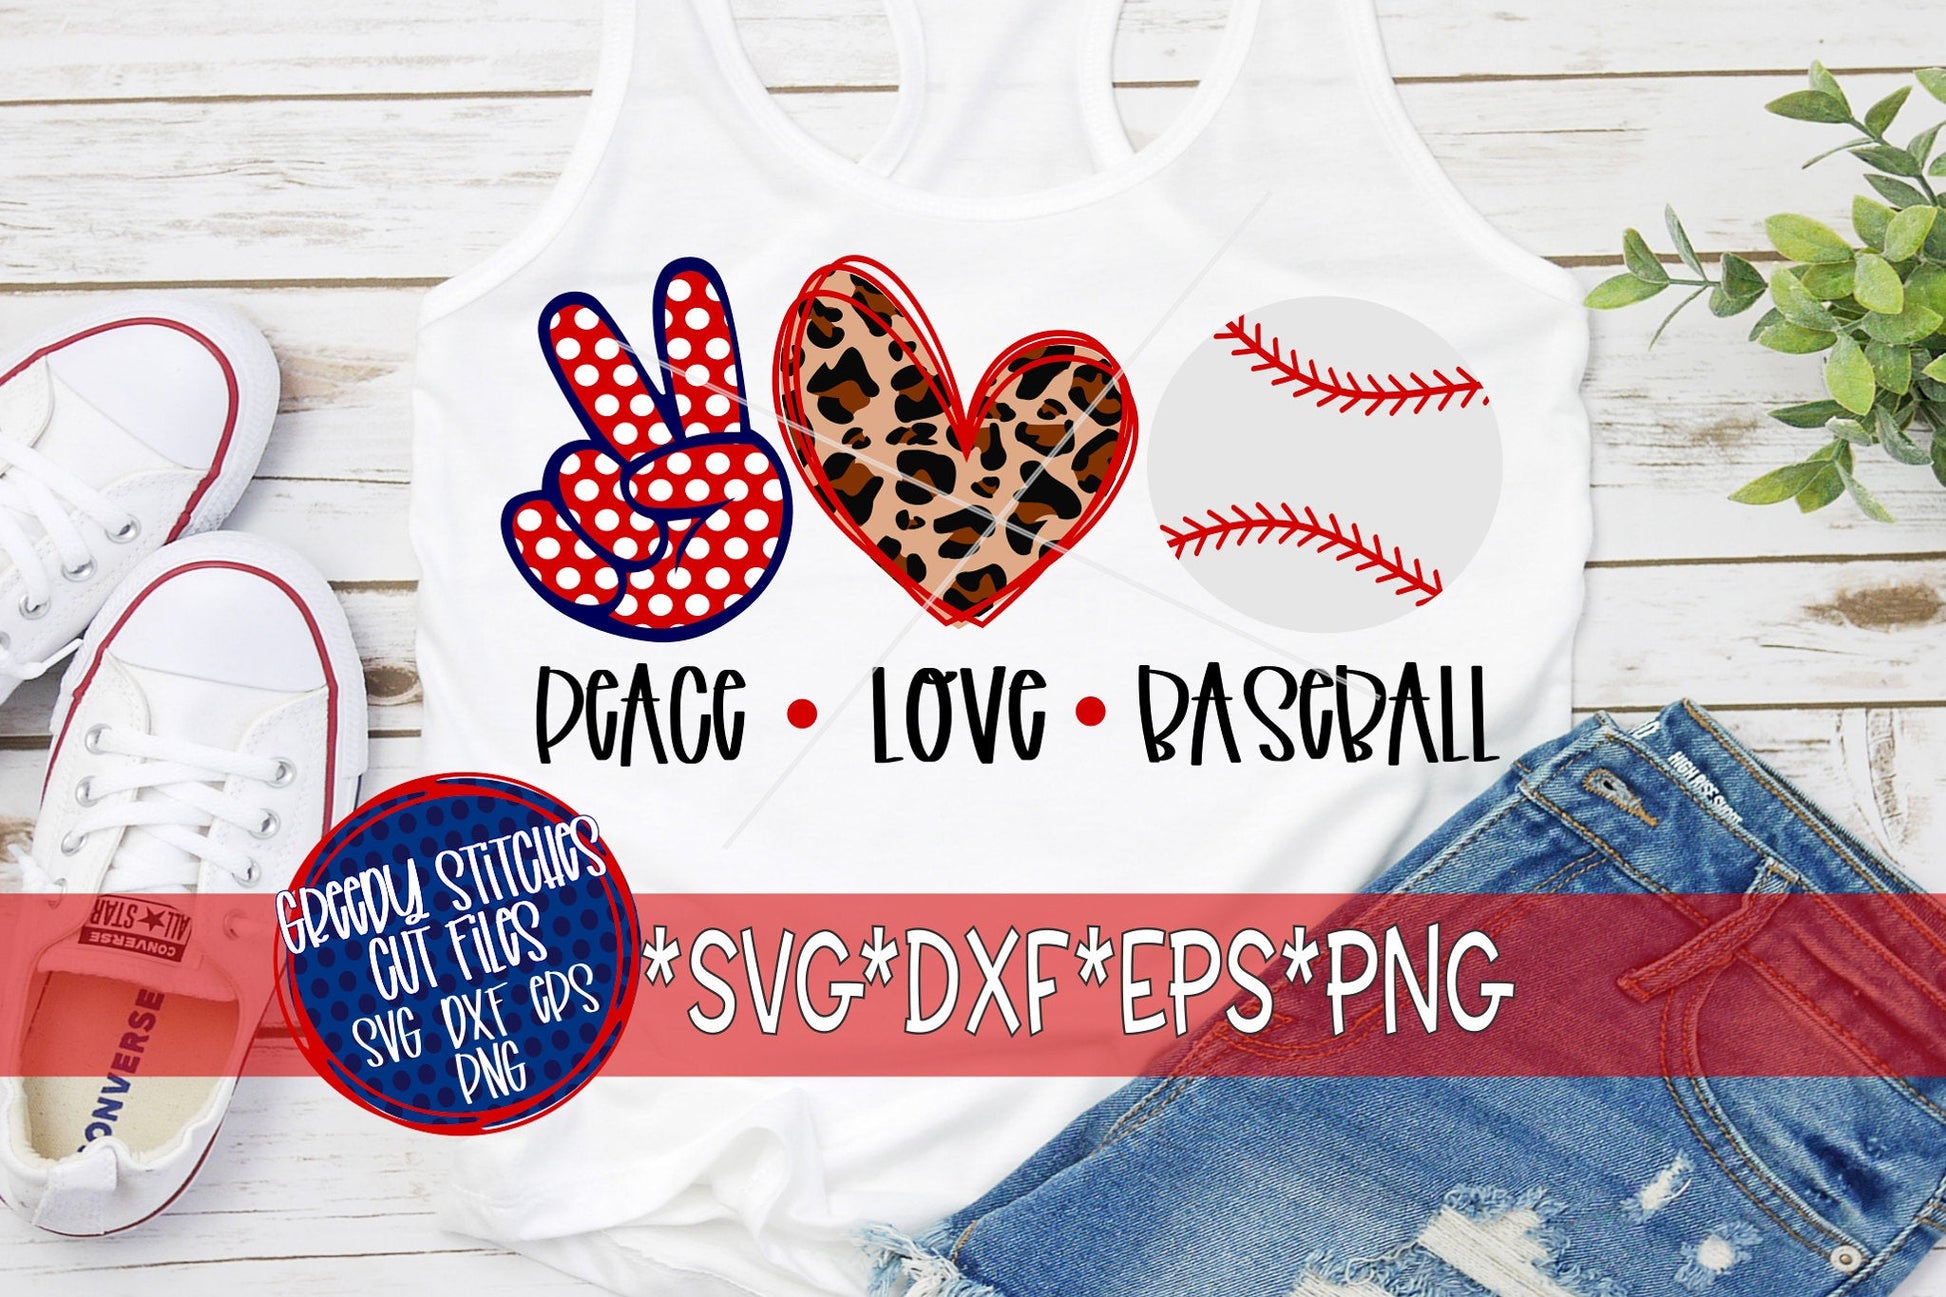 Peace Love Baseball svg, eps, dxf, png. Baseball Love SvG | Love Baseball DxF | Baseball SvG | Baseball Mom SvG | Instant Download Cut Files